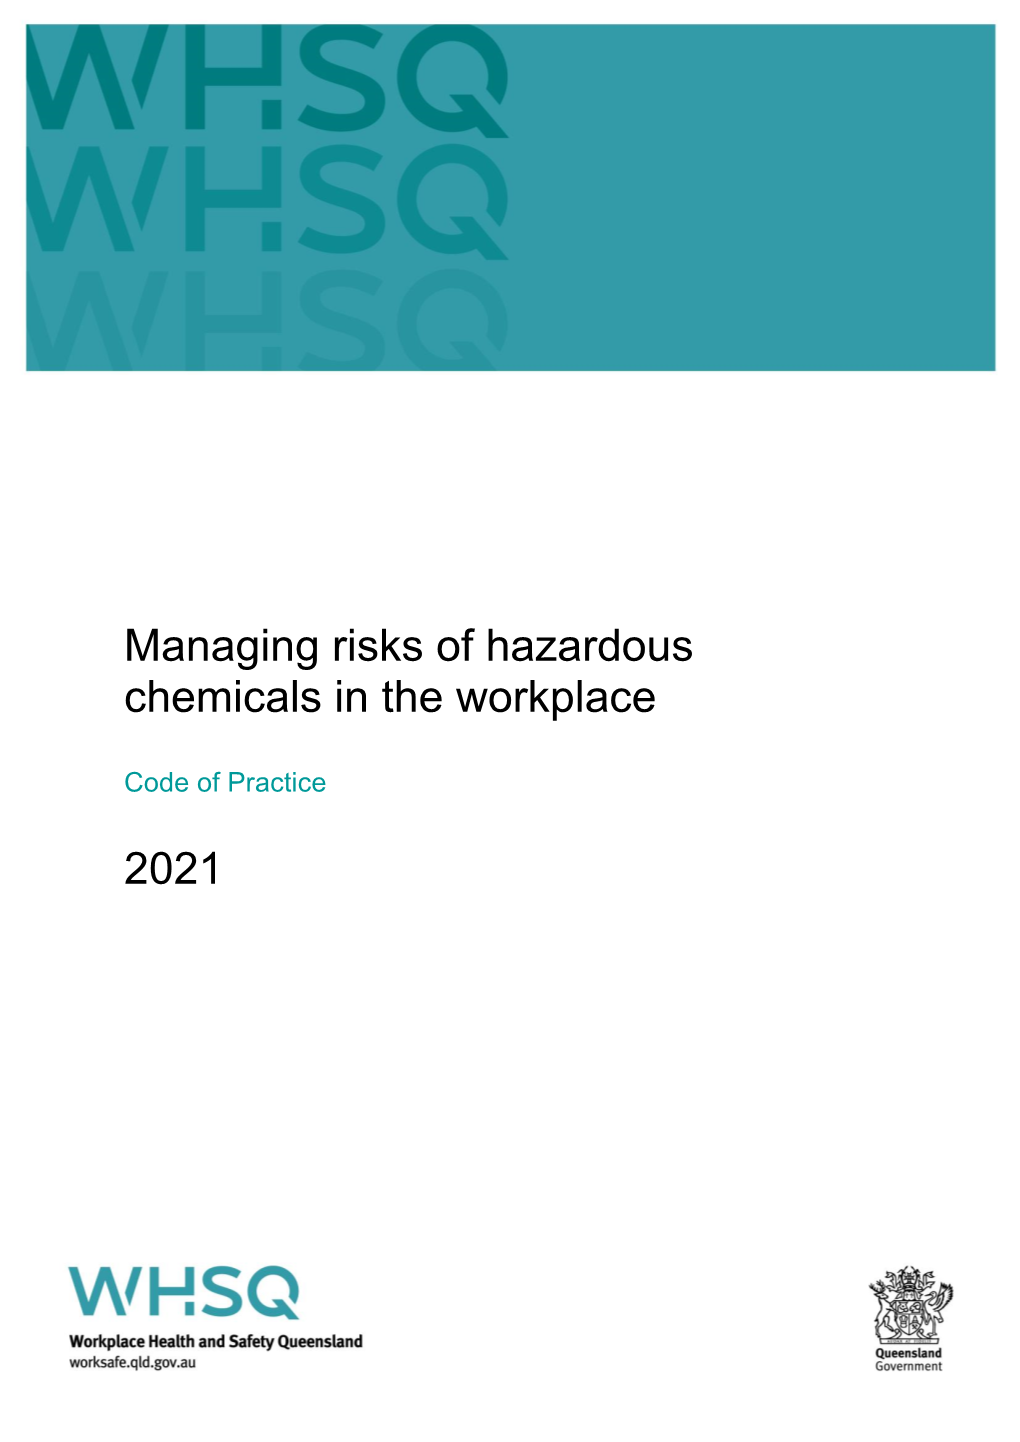 Managing Risks of Hazardous Chemicals in the Workplace